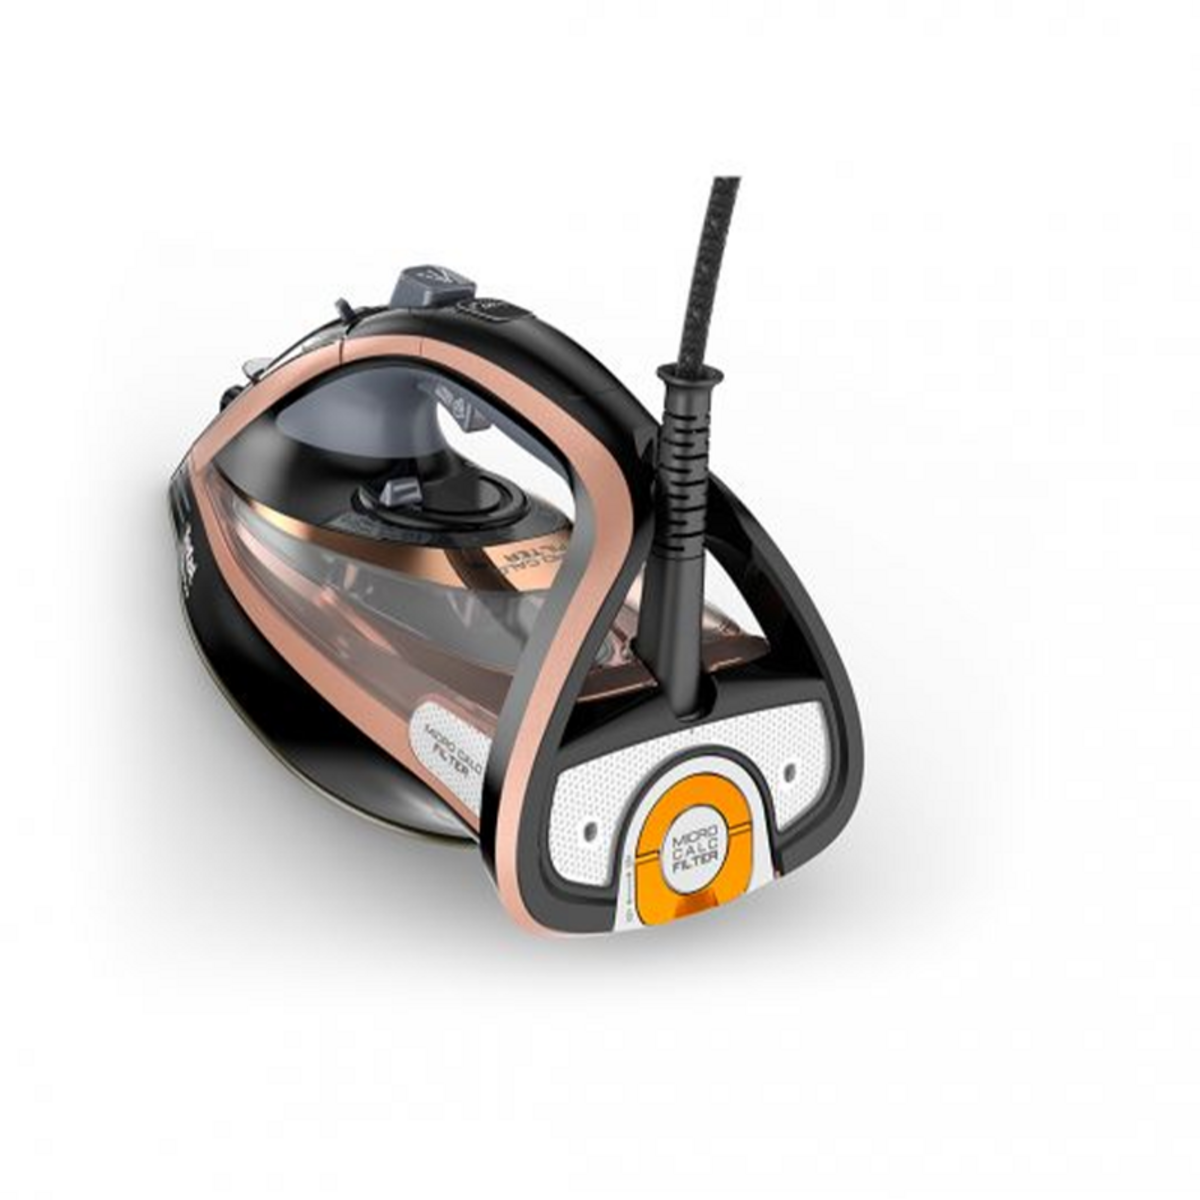 TEFAL FV9845G0 Ultimate Pure Anti-scale Steam Iron, Black / Rose Gold